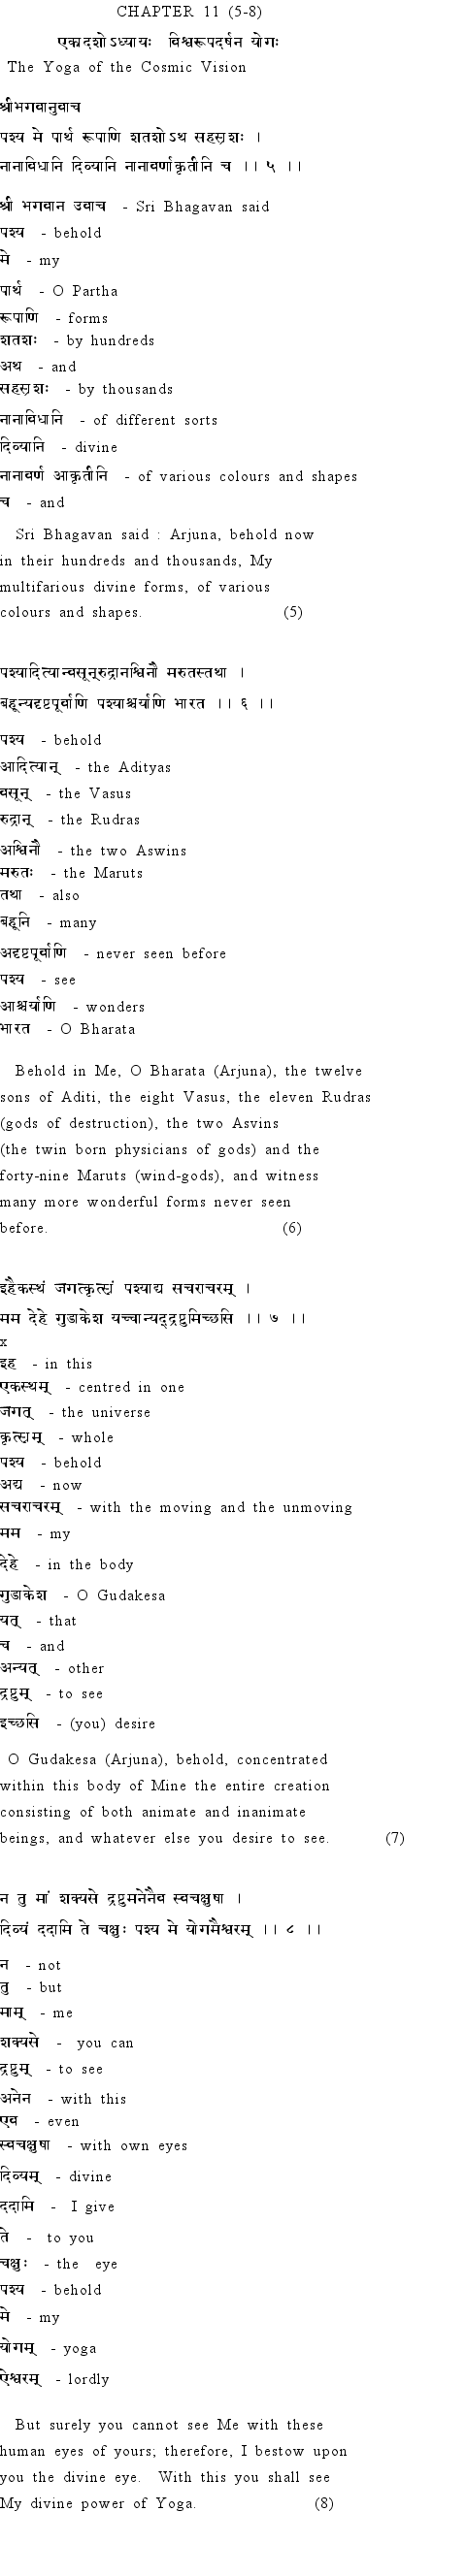 Text of Ch.11_2